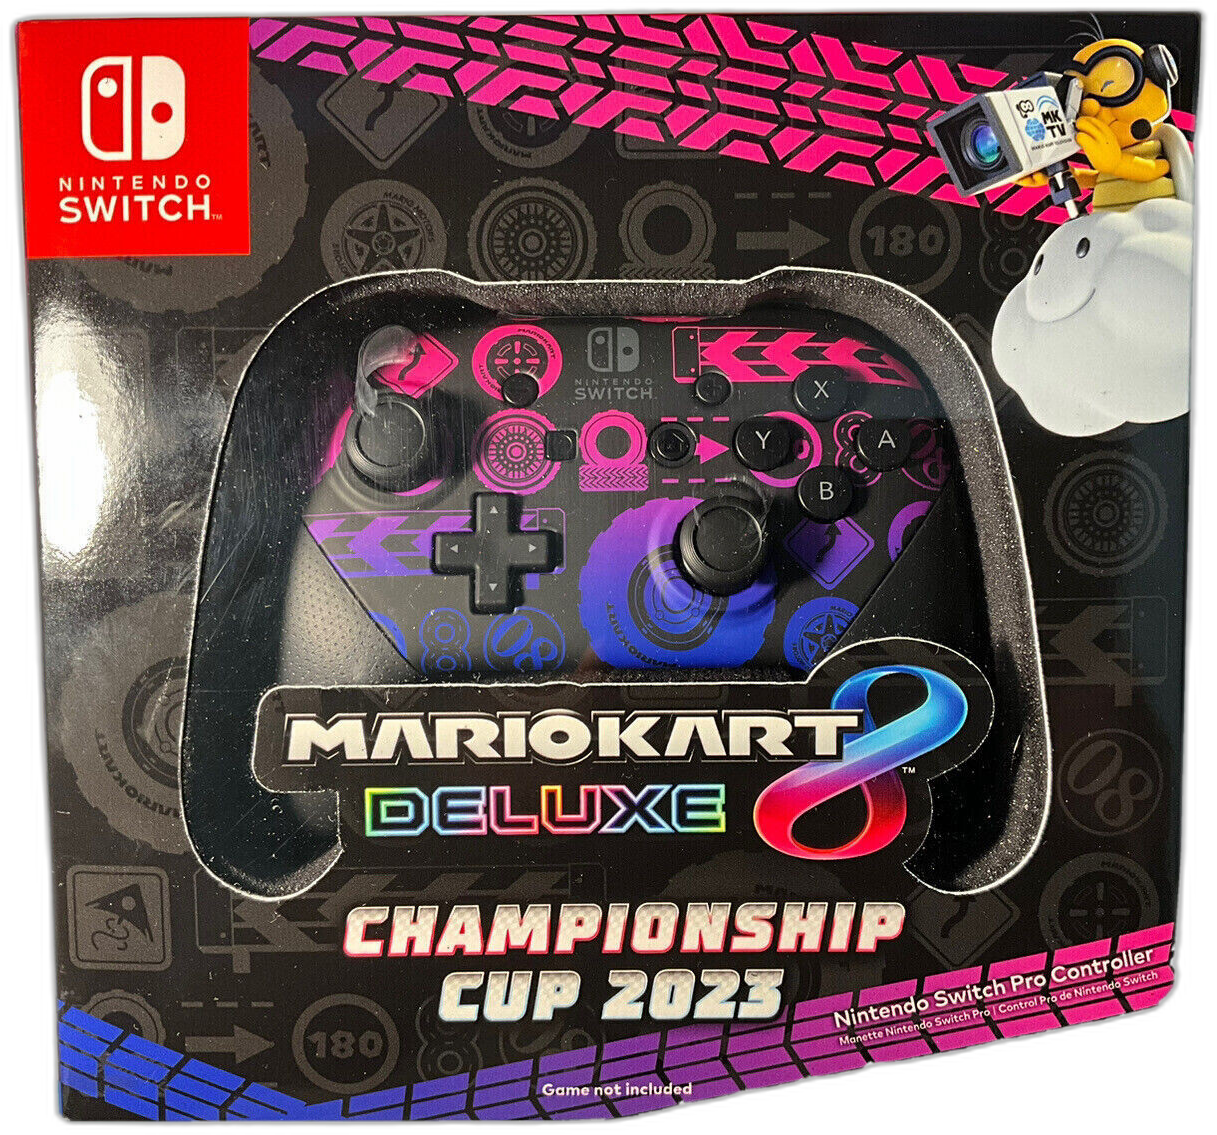  Nintendo Switch Mario Kart 8 Deluxe Championship cup 2023 Controller